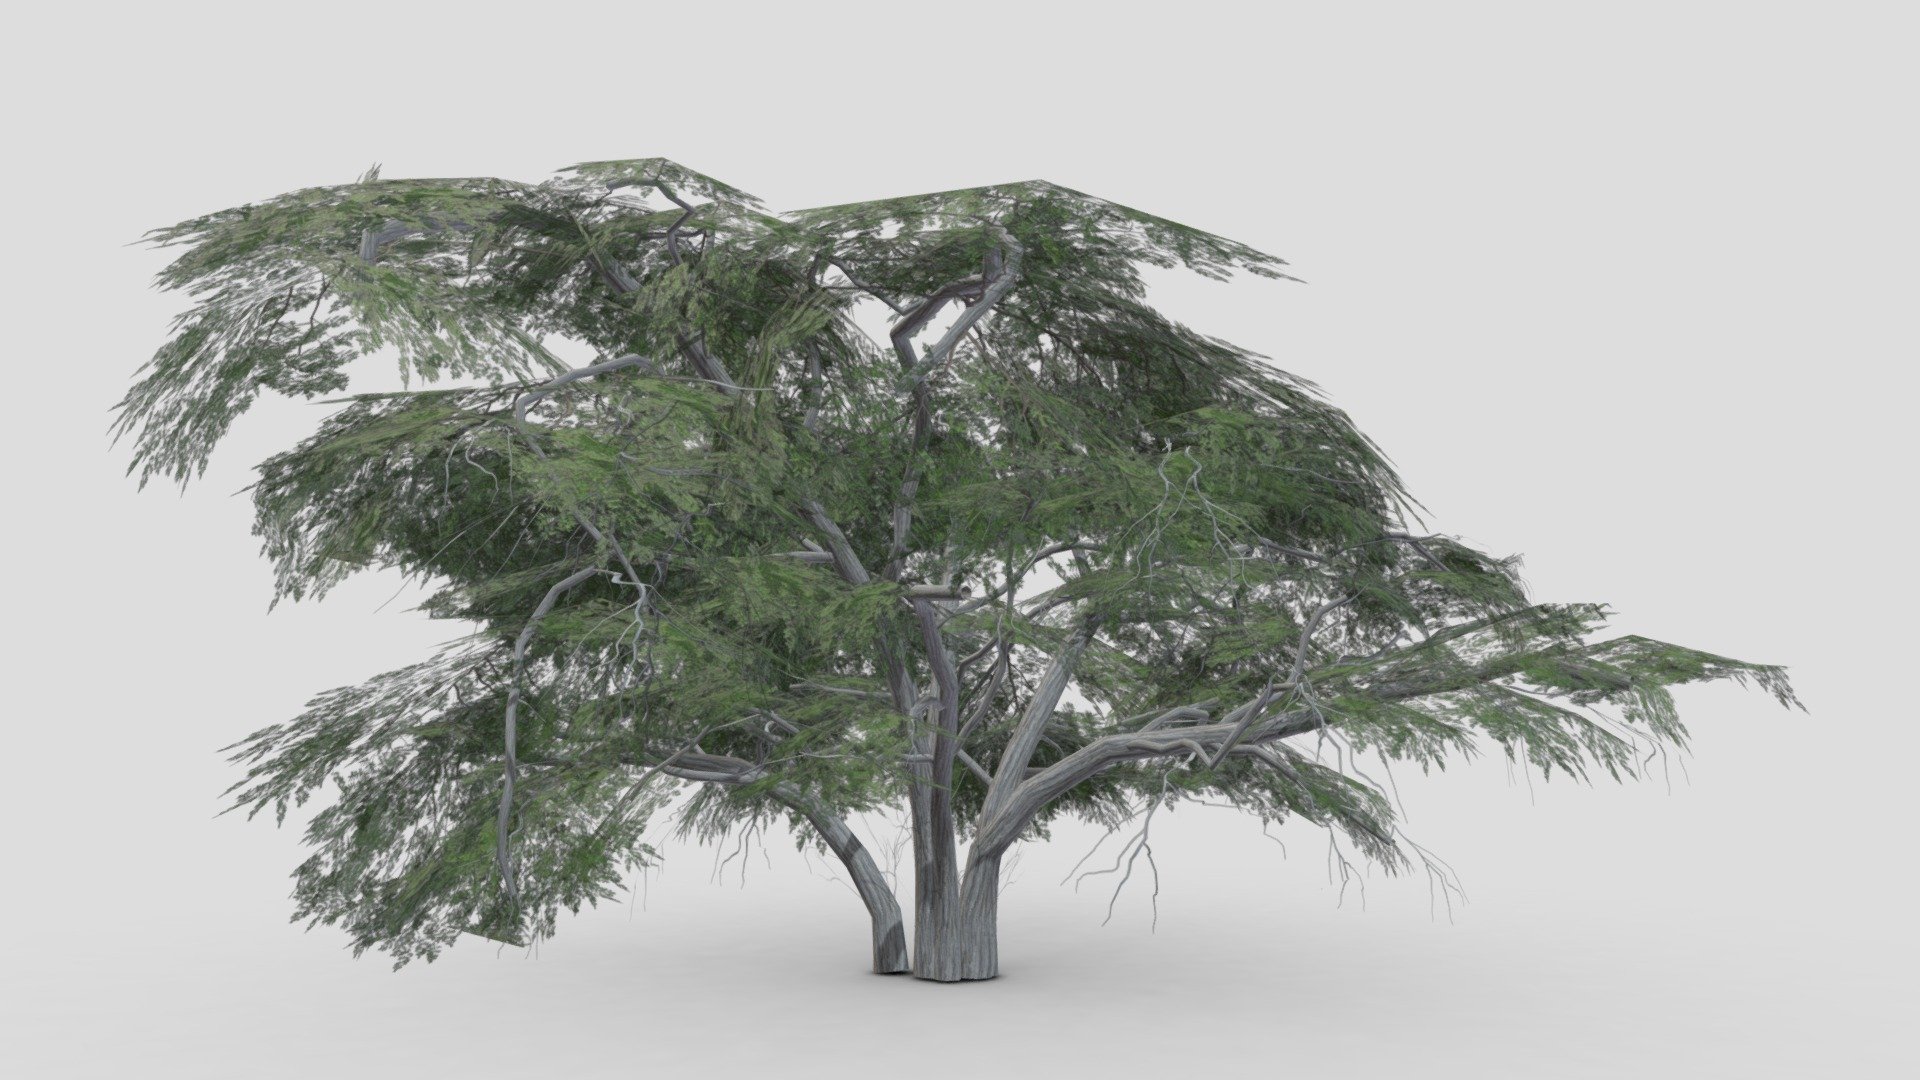 I tried to work on Acacia Tree 3D model. So after a long time I made this 3D low poly model of Acacia Tree 3d model